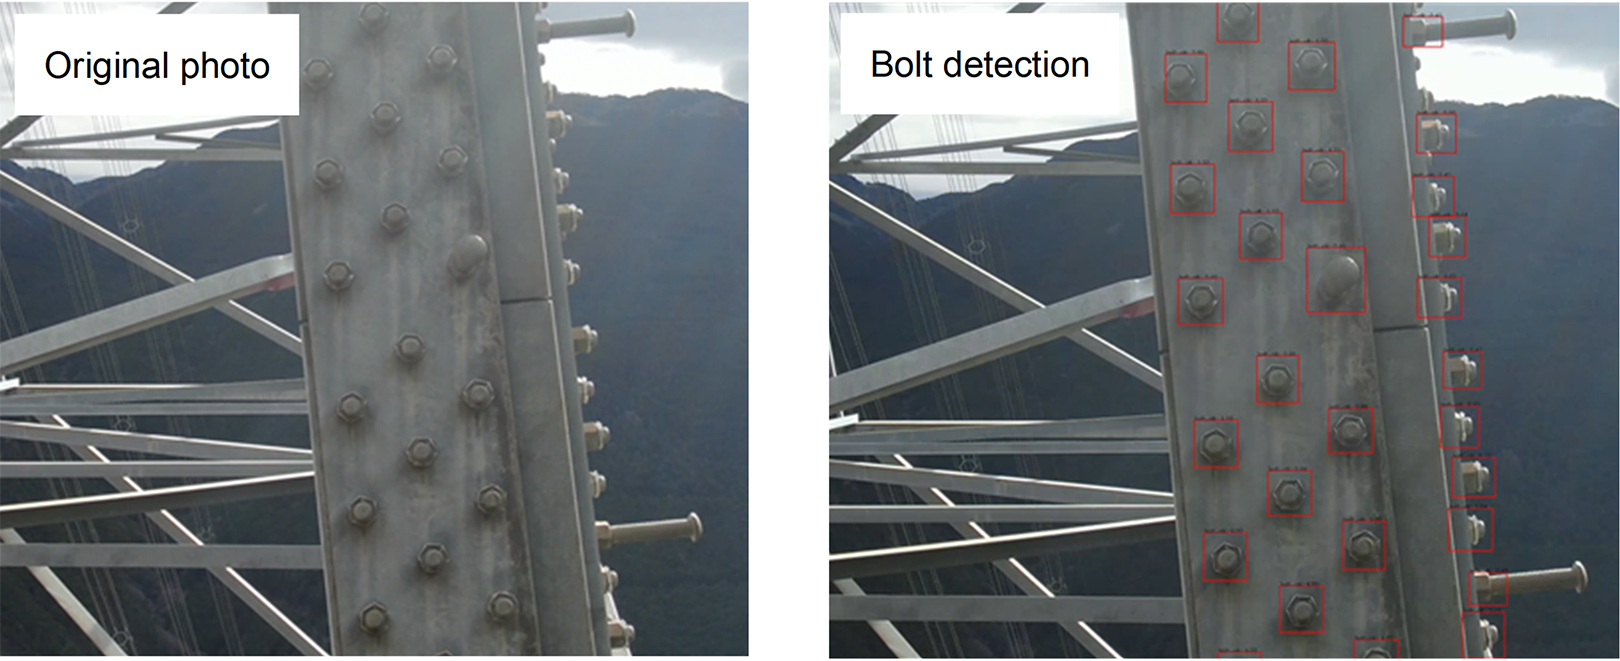 Bolt detection by AI